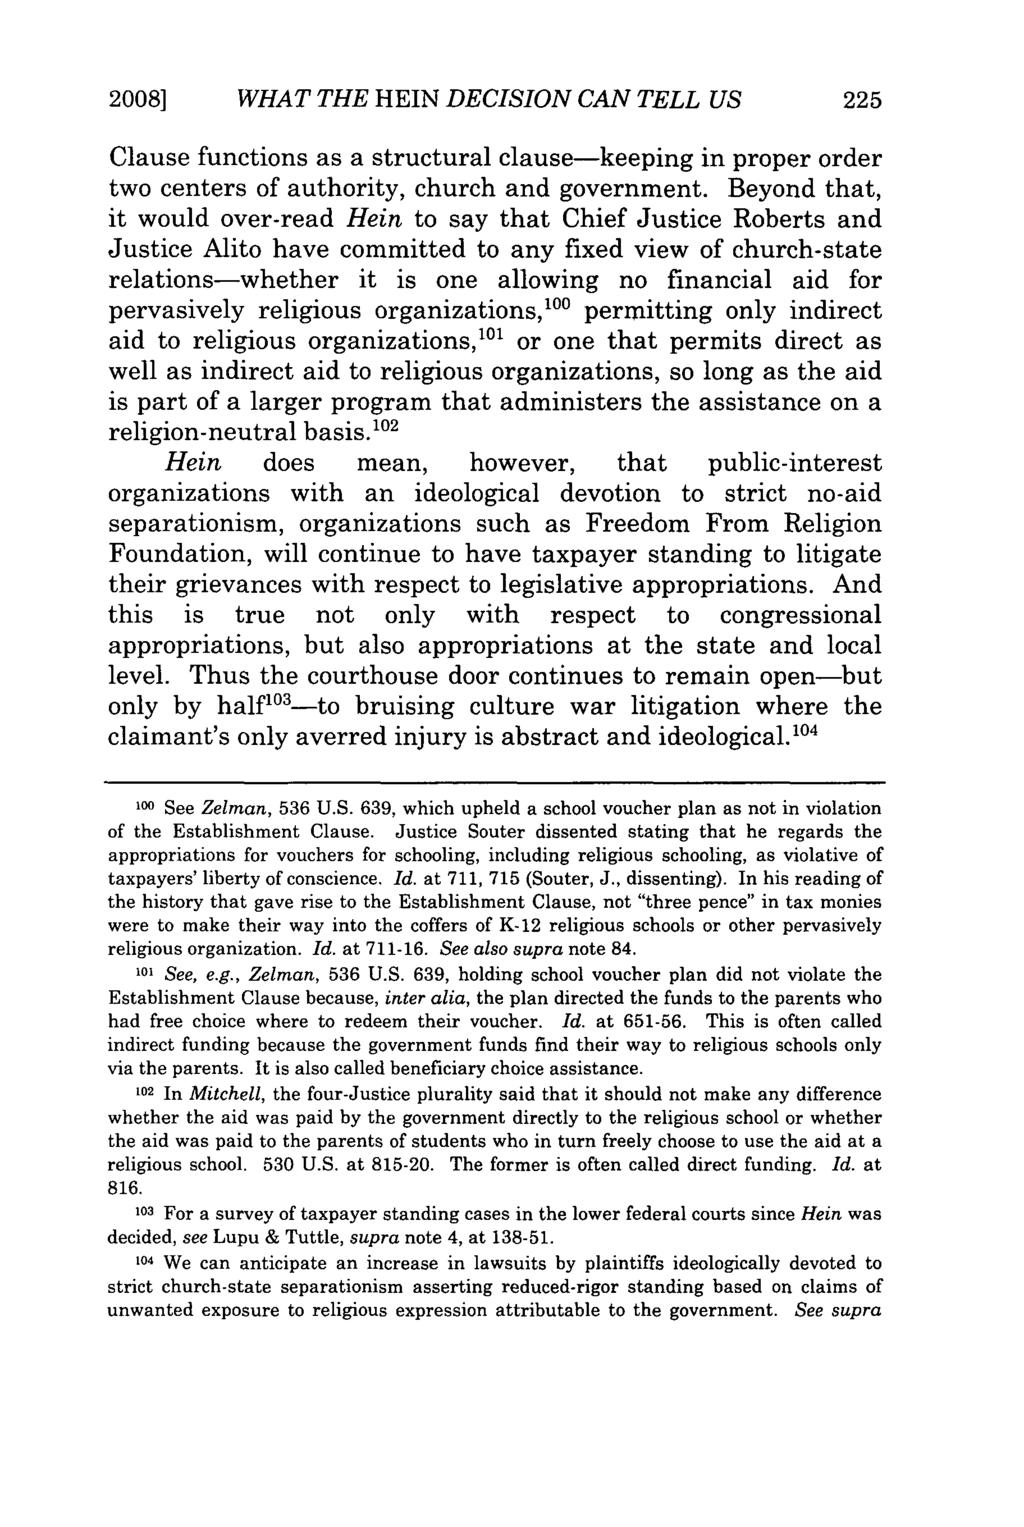 2008] WHAT THE HEIN DECISION CAN TELL US 225 Clause functions as a structural clause-keeping in proper order two centers of authority, church and government.